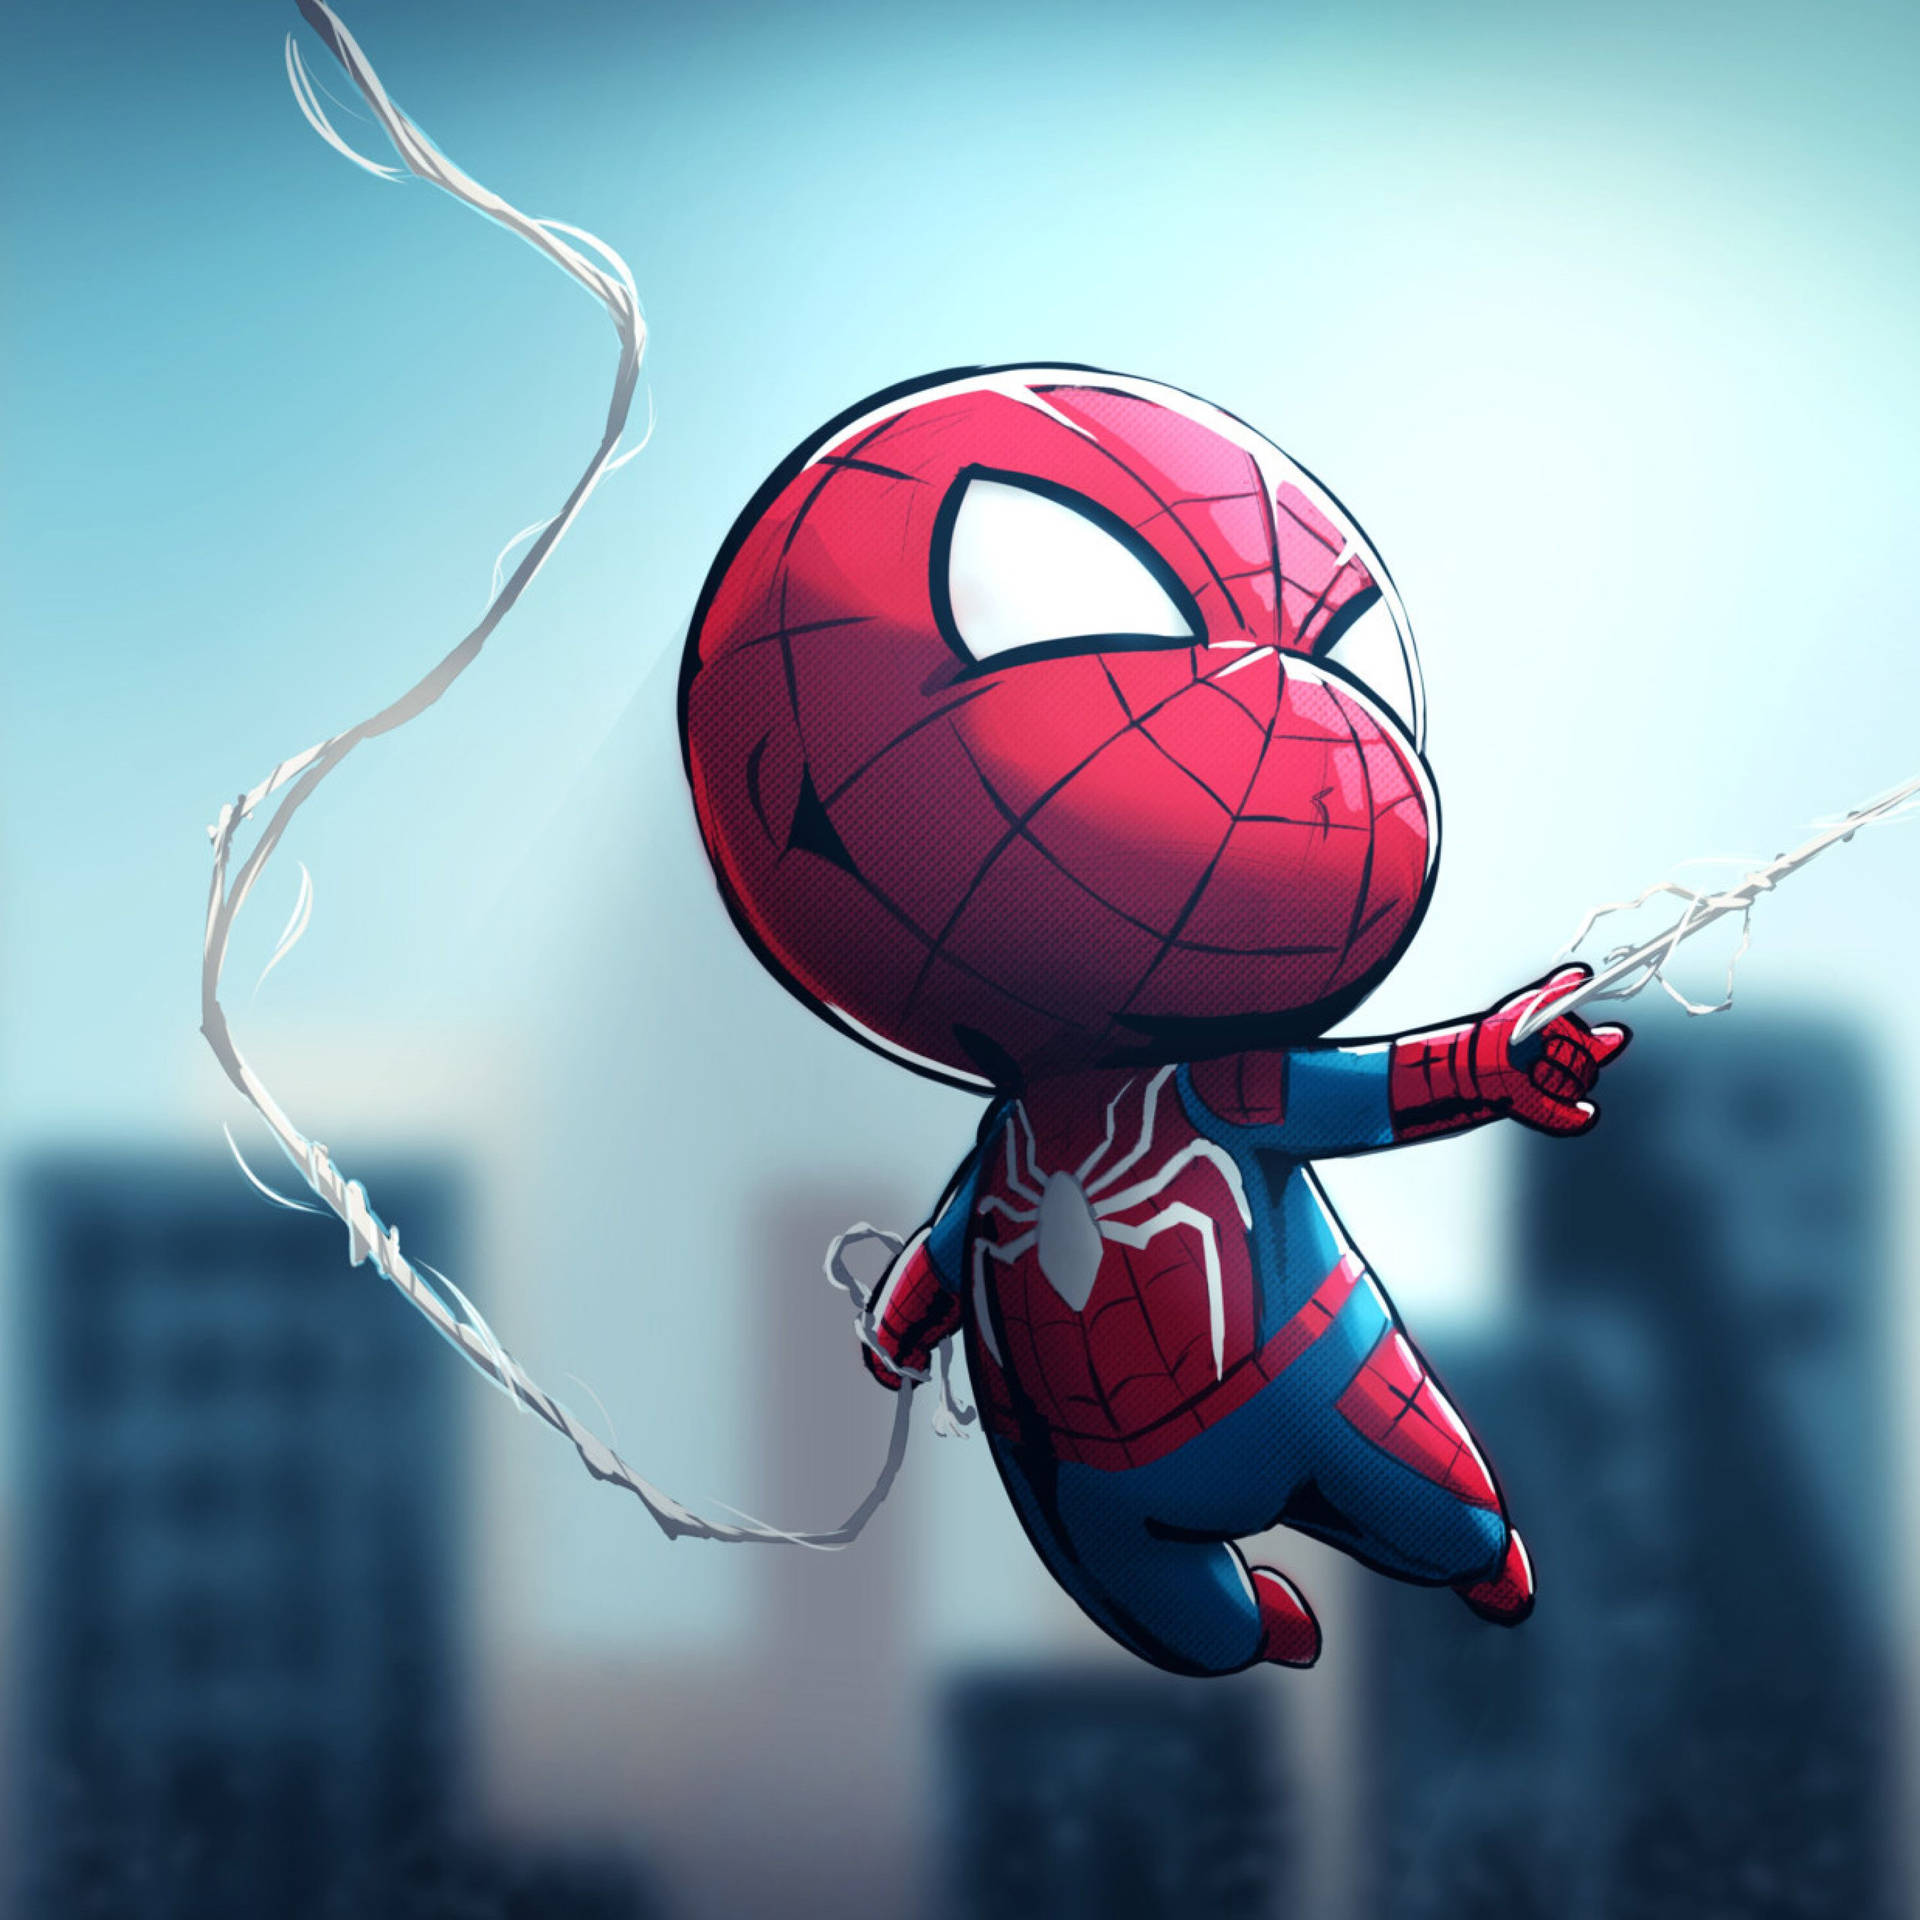 Chibi Spiderman with a Balloon! Wallpaper